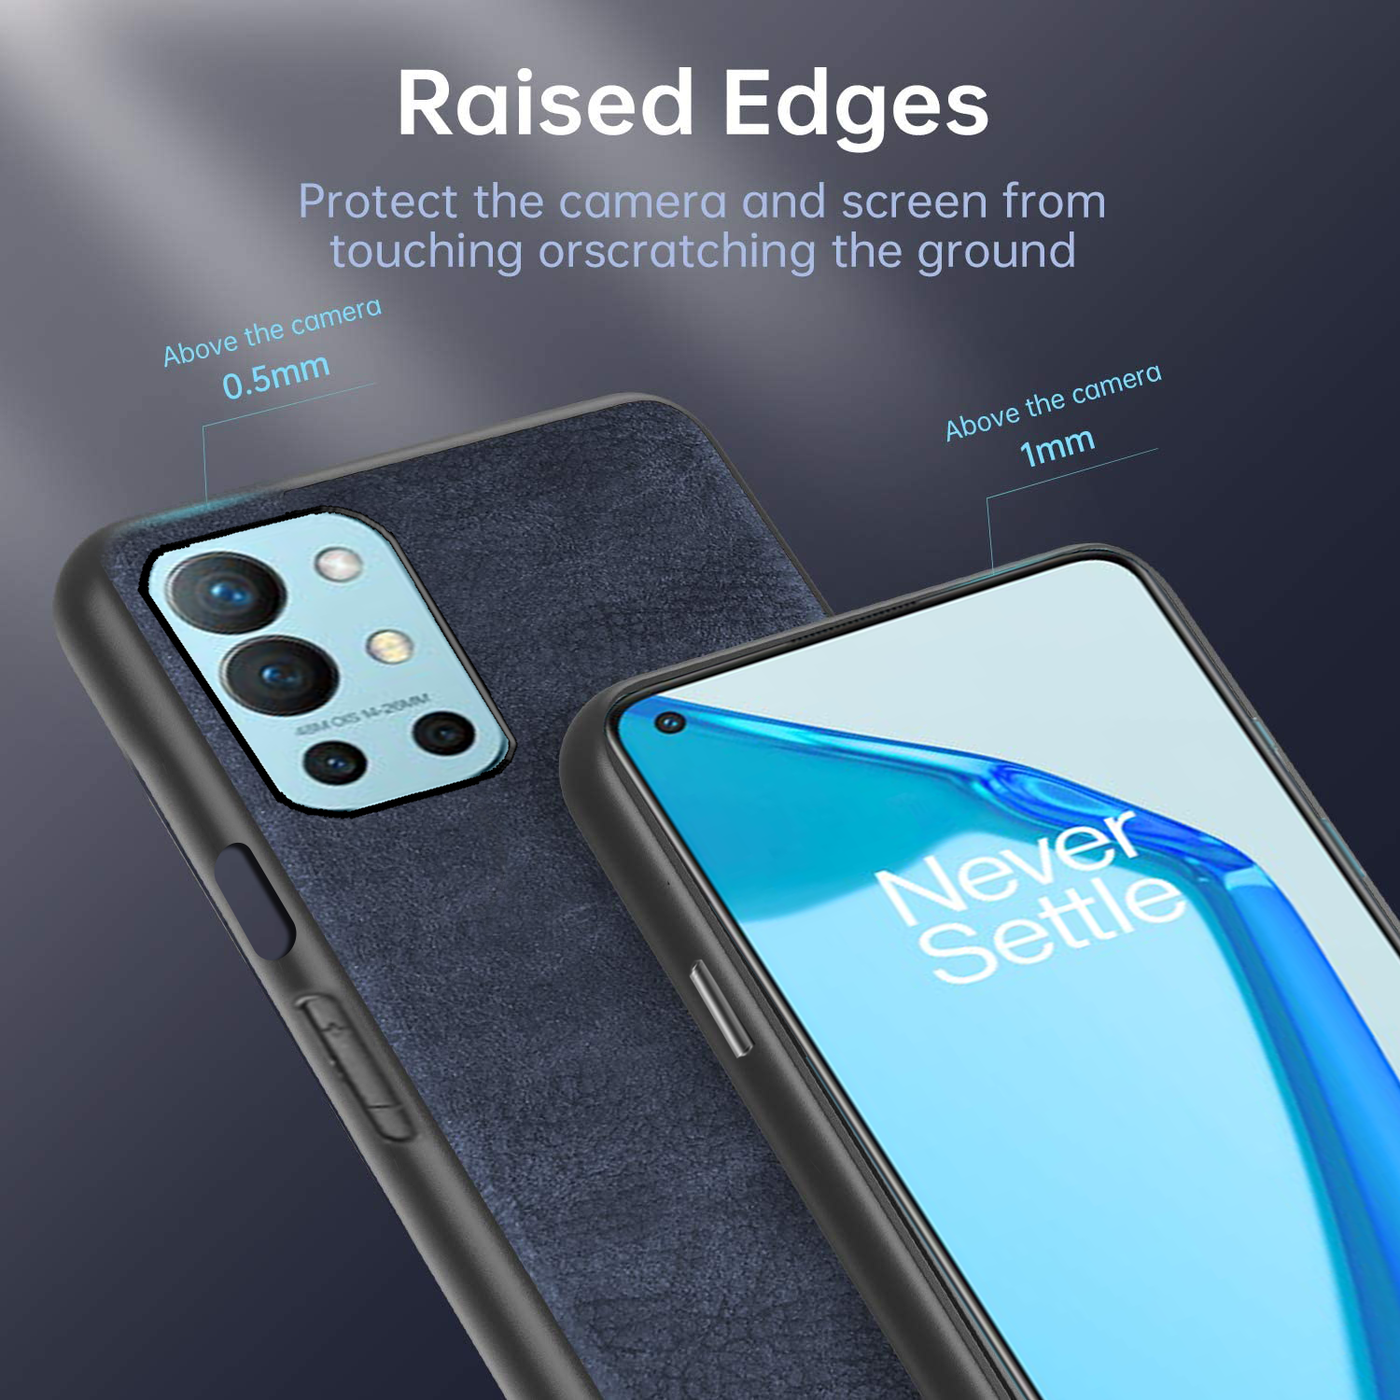 Oneplus 9R raised edges to provide full protection